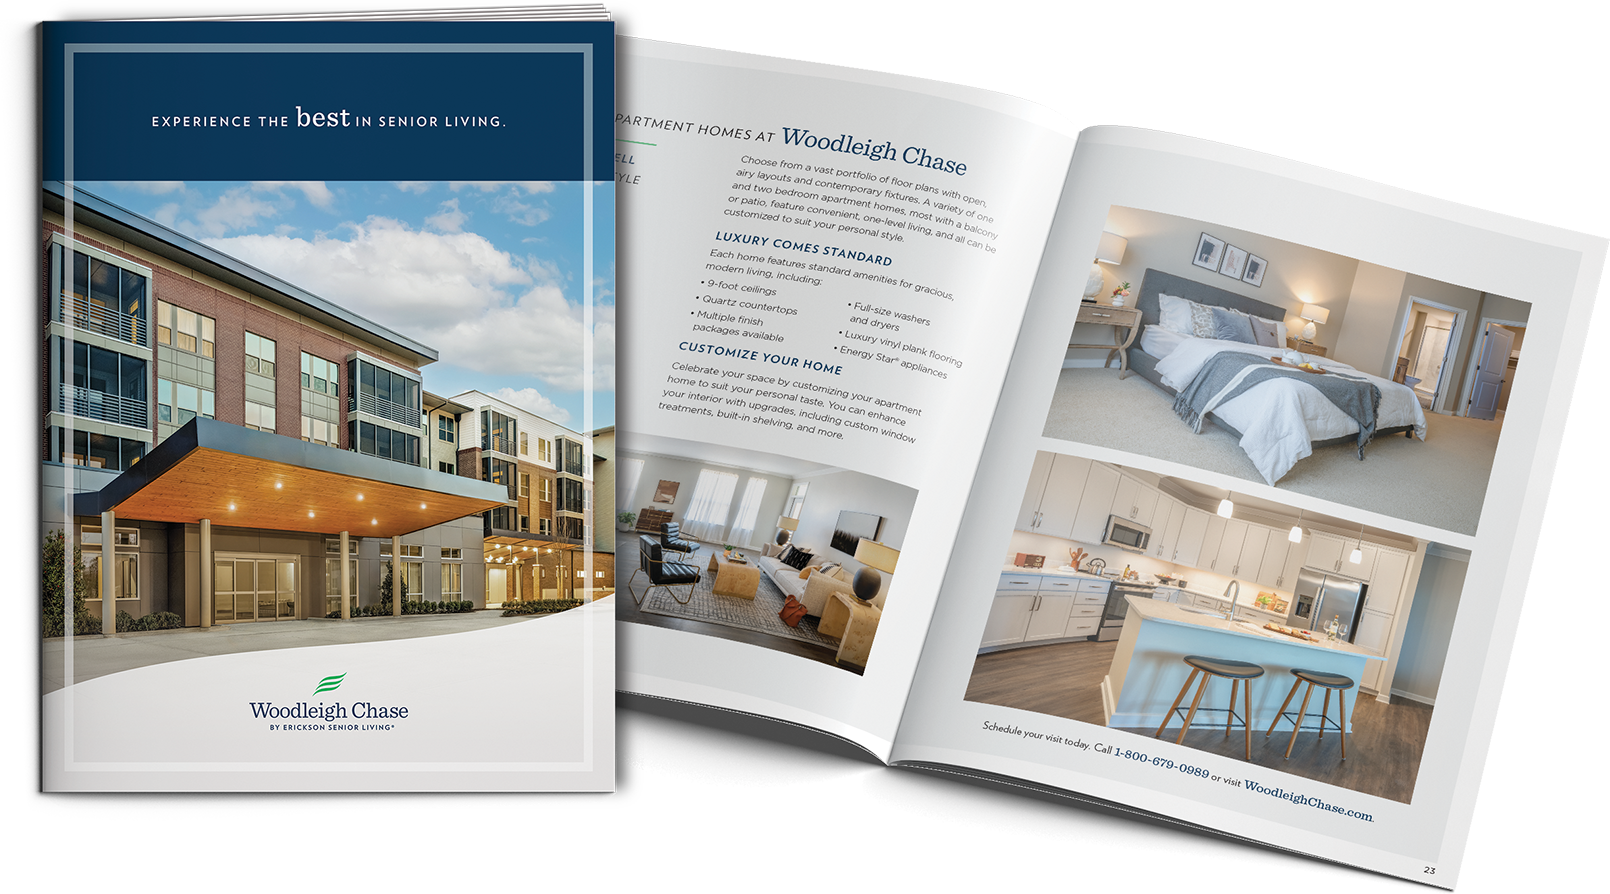 Woodleigh Chase brochure cover and interior spread.